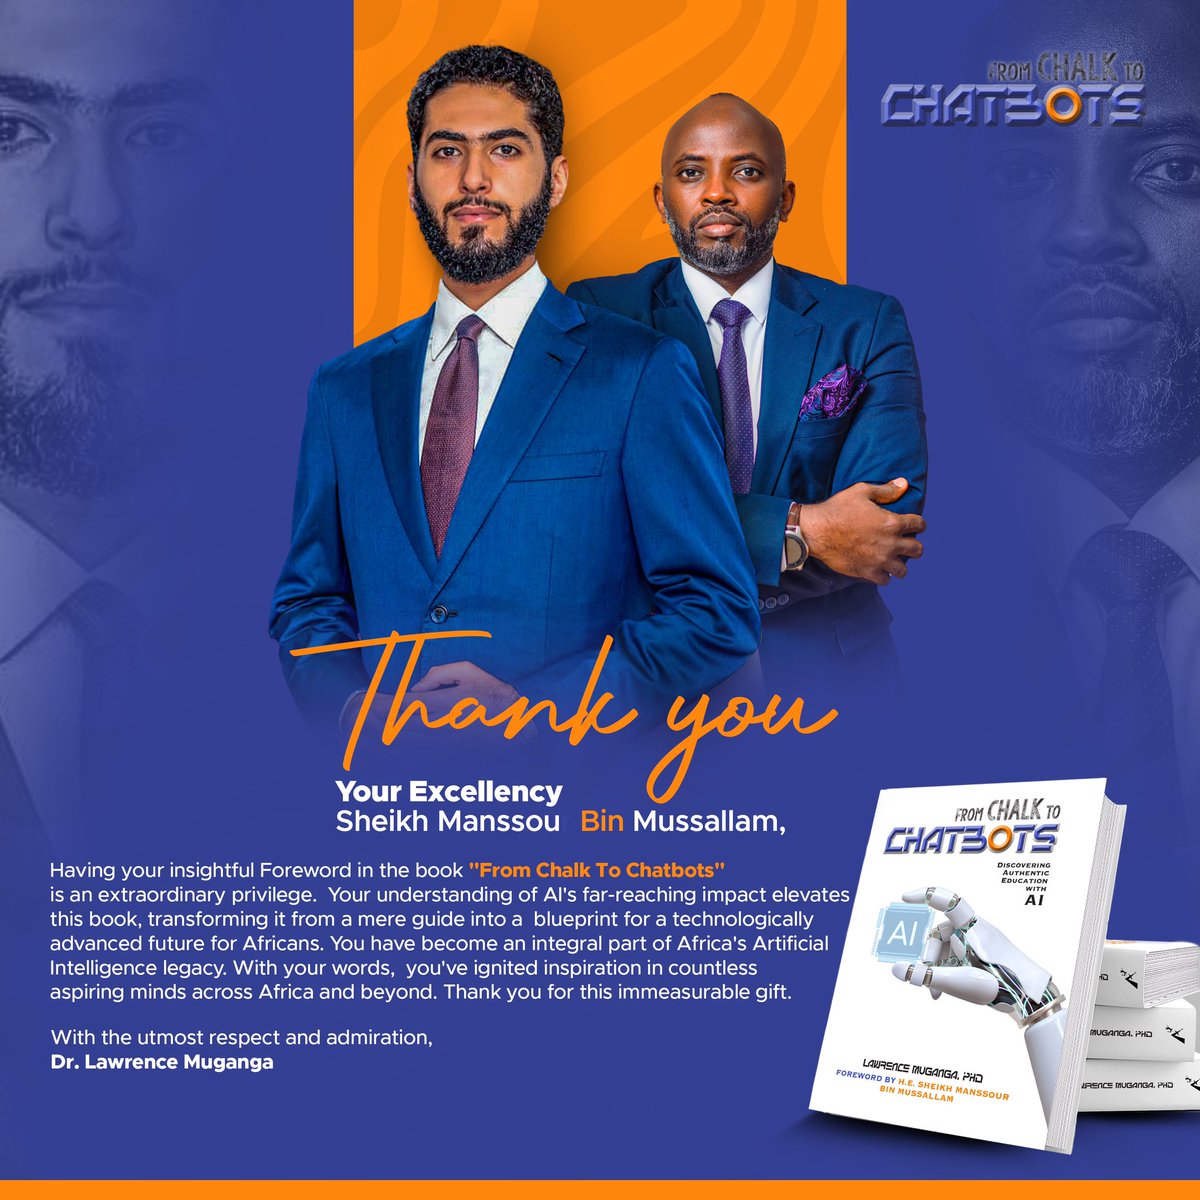 Your Excellency Sheikh @MBinMussallam, Secretary-General of the Organisation of Southern Cooperation (OSC), it is an honor to have your foreword in “From Chalk to Chatbots.” Your deep and broad understanding of AI's impact enriches this book, elevating it from a mere guide to a